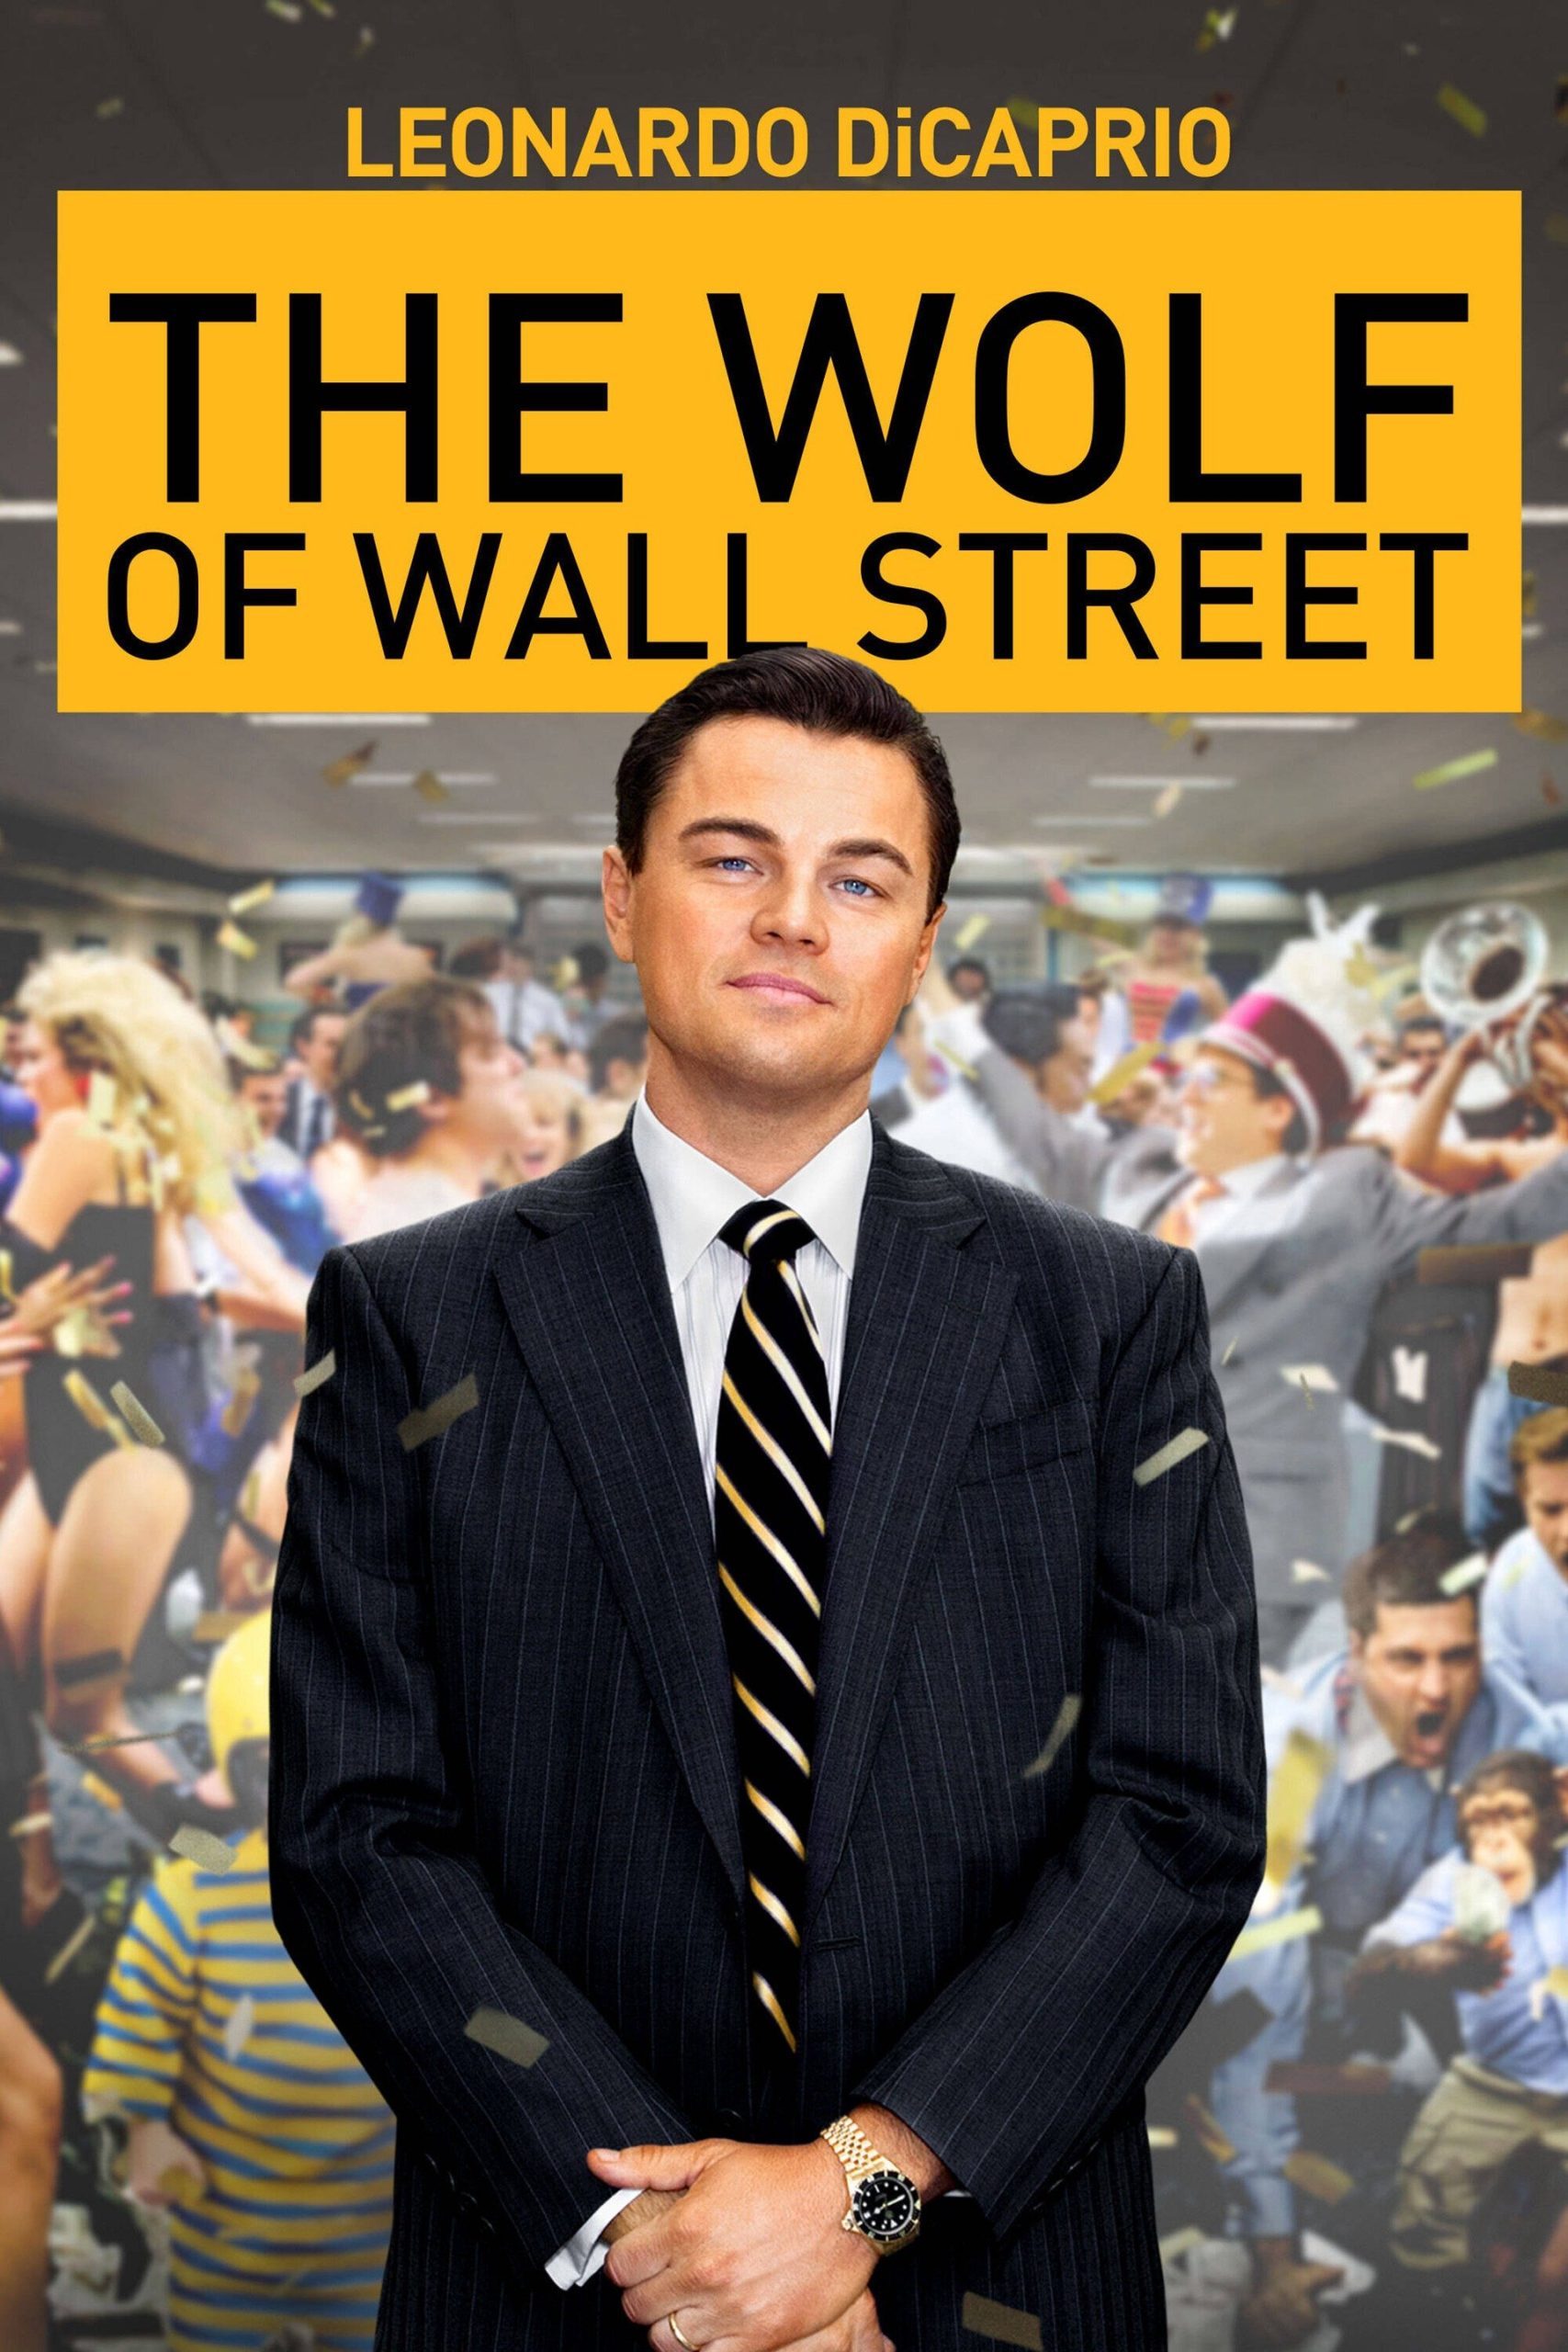 is the wolf of wall street on netflix